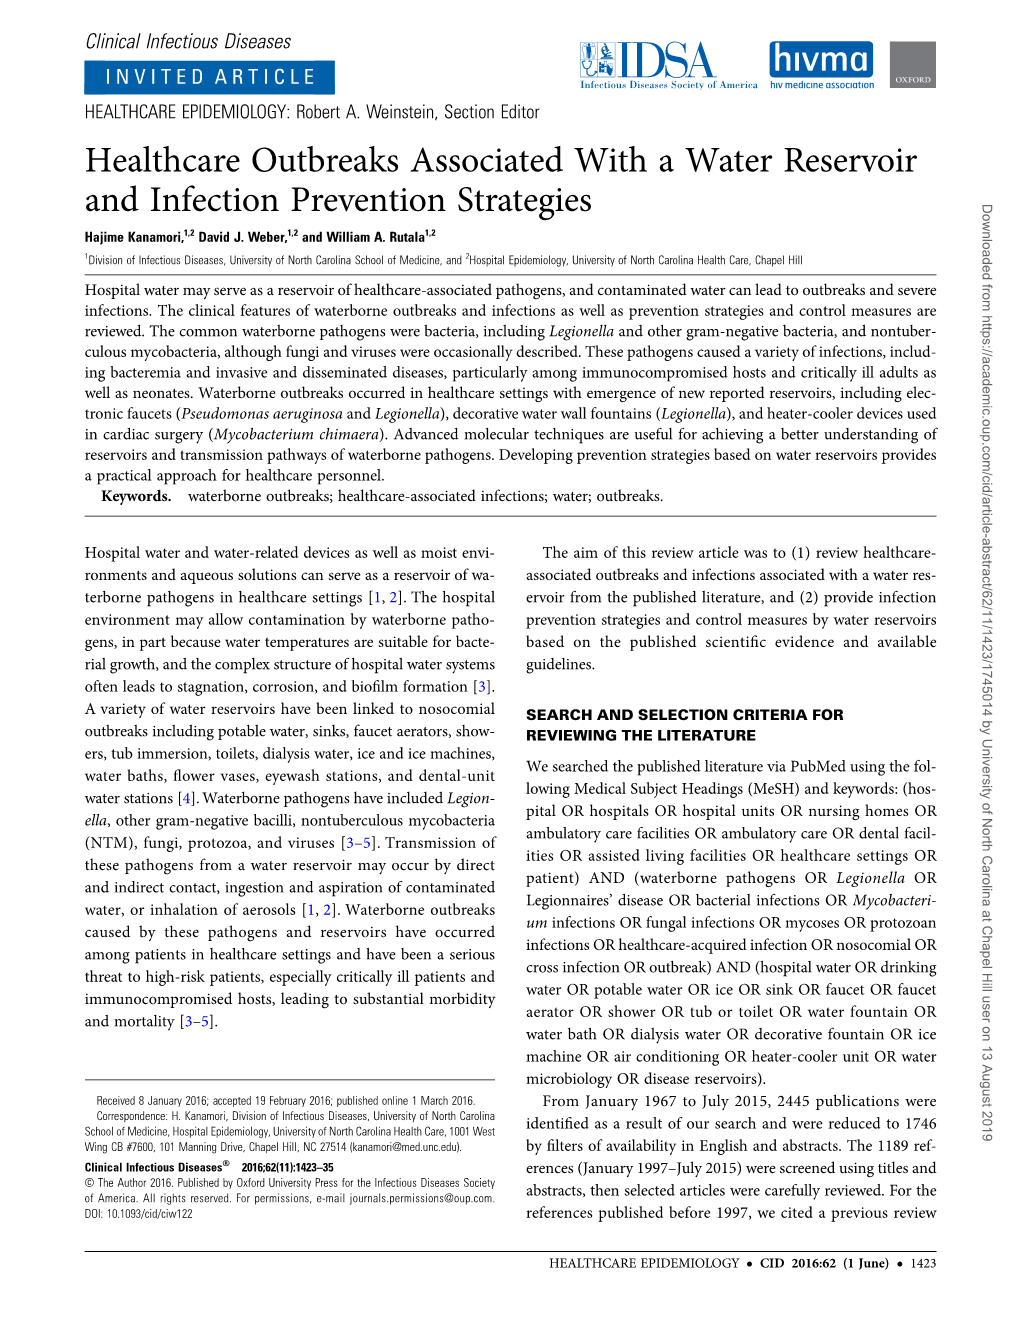 Healthcare Outbreaks Associated with a Water Reservoir and Infection